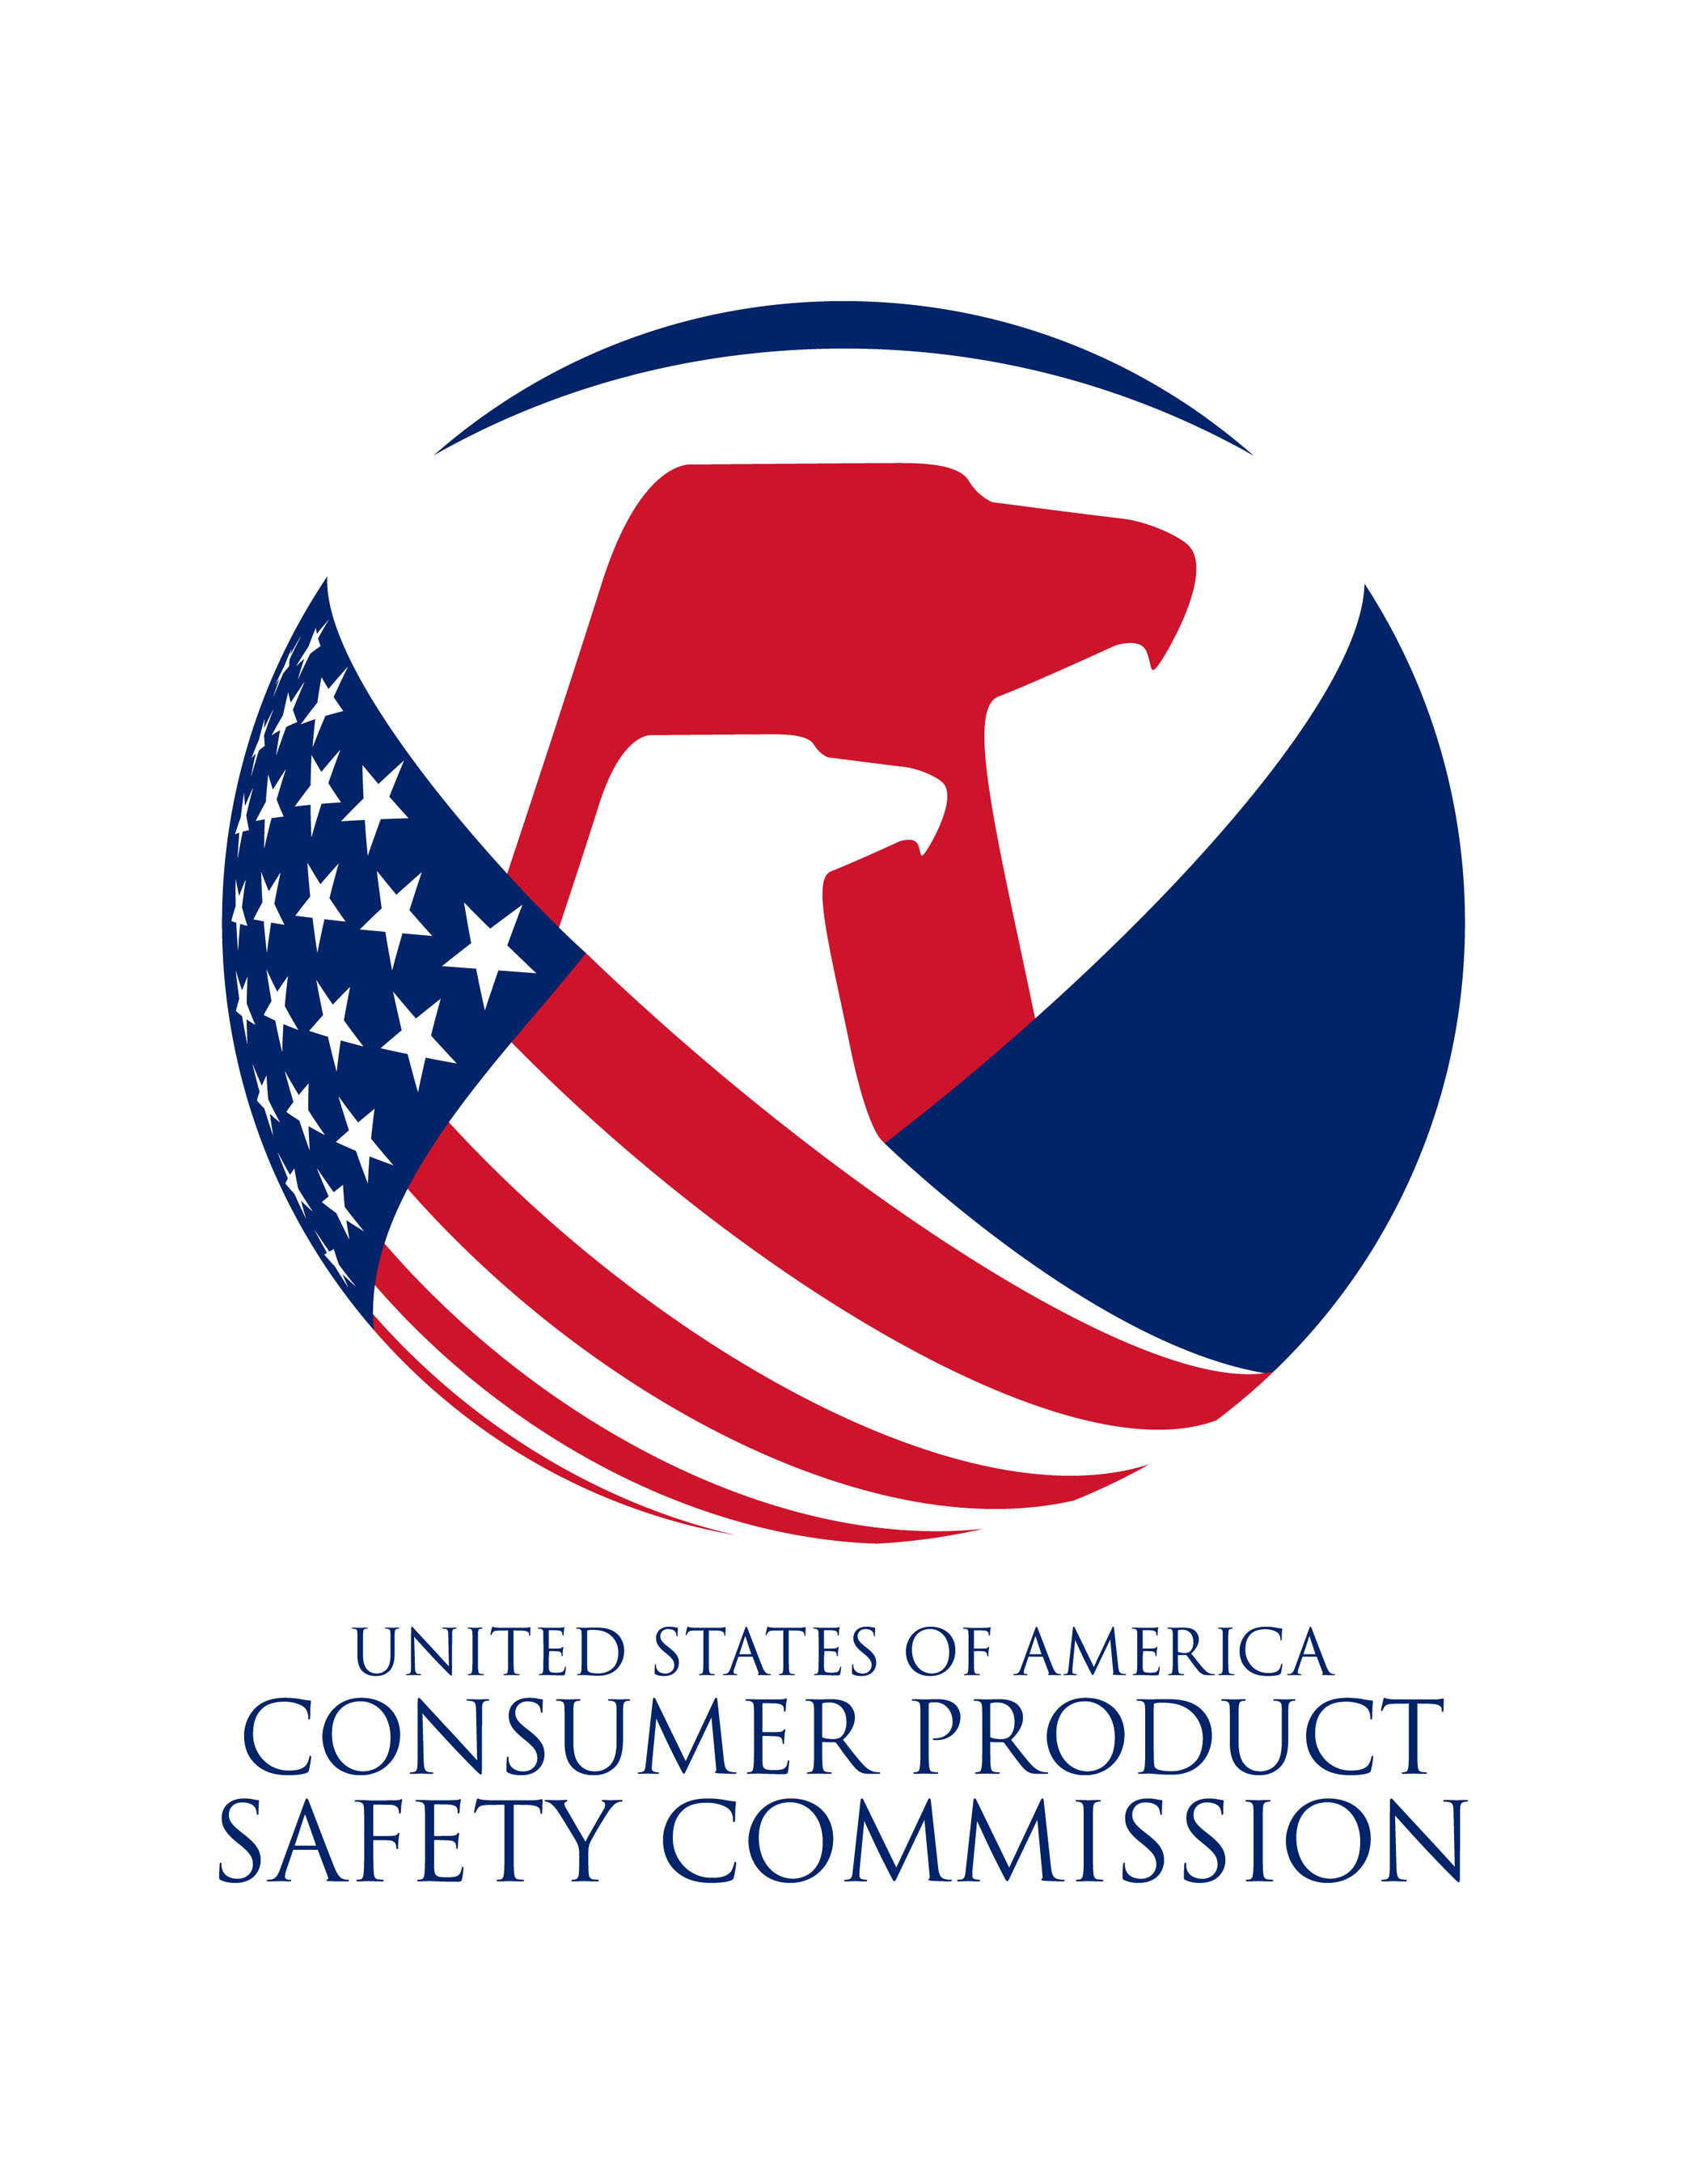 The U.S. Consumer Product Safety Commission is an independent federal agency created by Congress in 1973 and charged with protecting the American public from unreasonable risks of serious injury or death from more than 15,000 types of consumer products under the agency's jurisdiction. To report a dangerous product or a product-related injury, call the CPSC hotline at 1-800-638-2772, or visit http//:www.cpsc.gov/talk.html. Further recall information is available at http://www.cpsc.gov